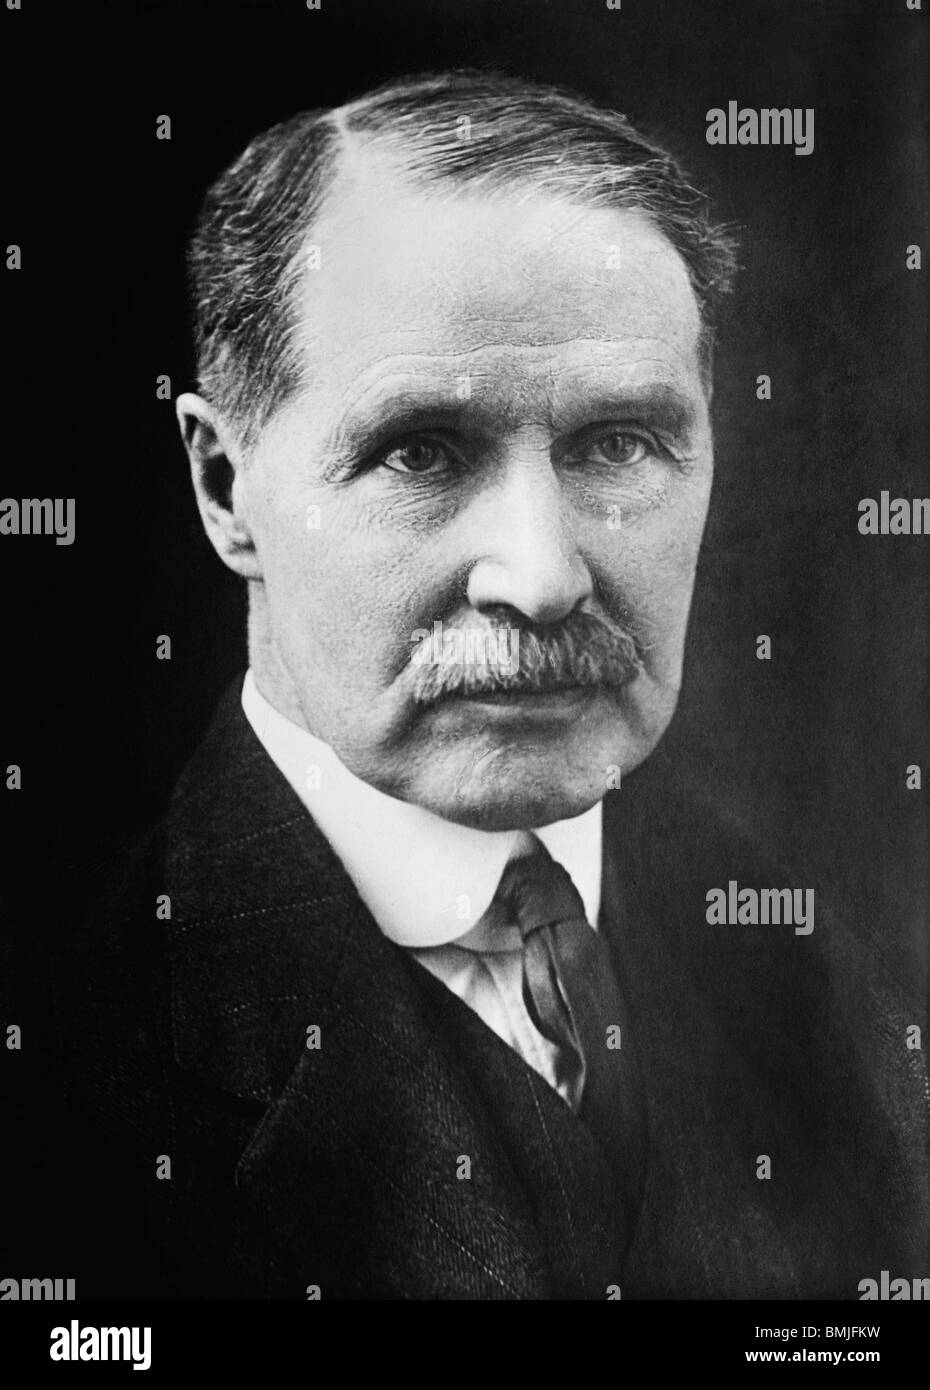 Undated portrait photo of Andrew Bonar Law (1858 - 1923) - Conservative Prime Minister of the UK from 1922 to 1923. Stock Photo